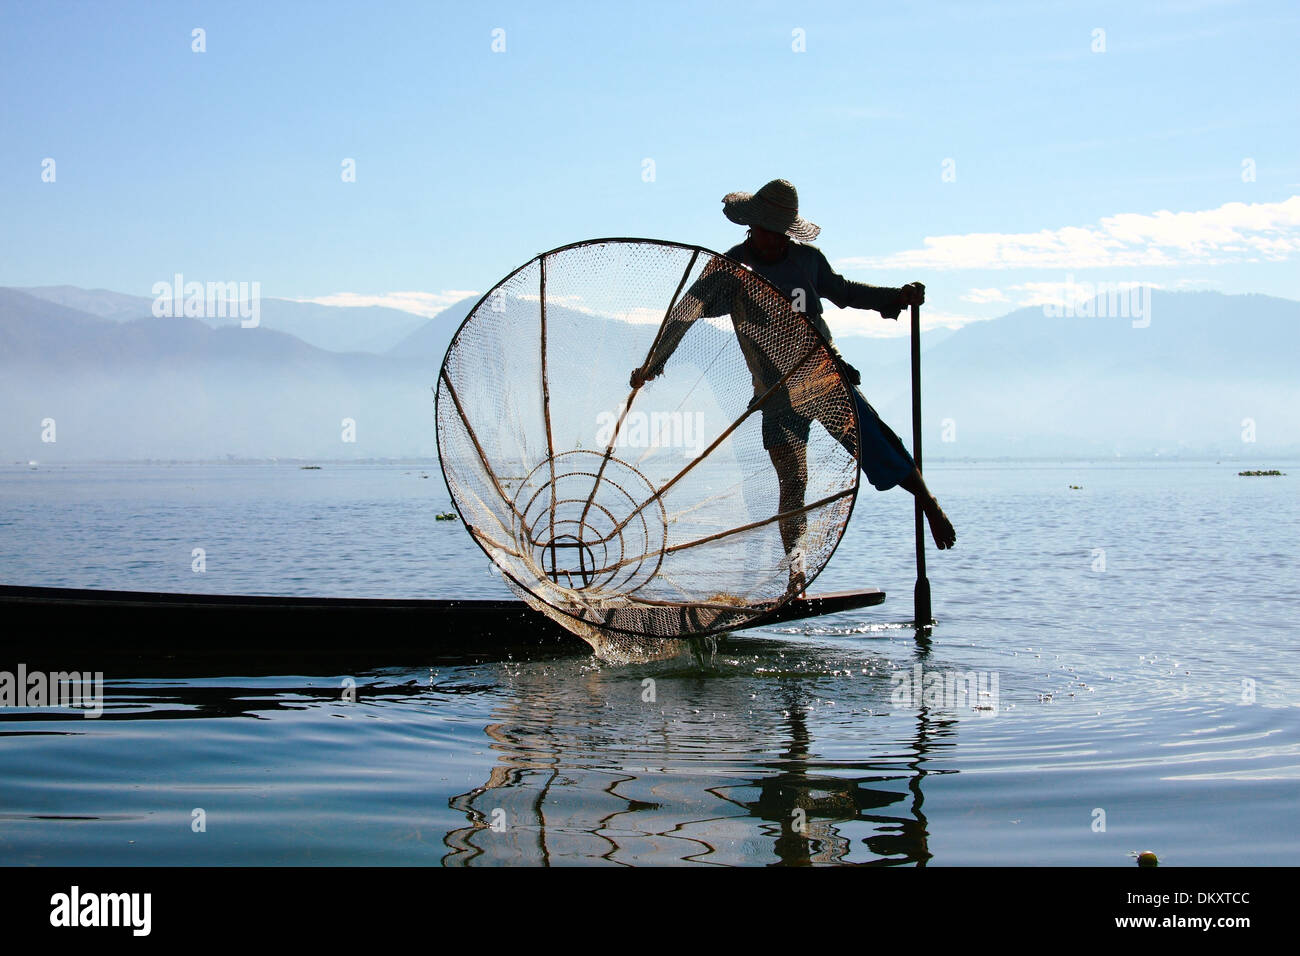 Intha people possess the leg-rowing style and the unique coop-like fishing equipment Stock Photo